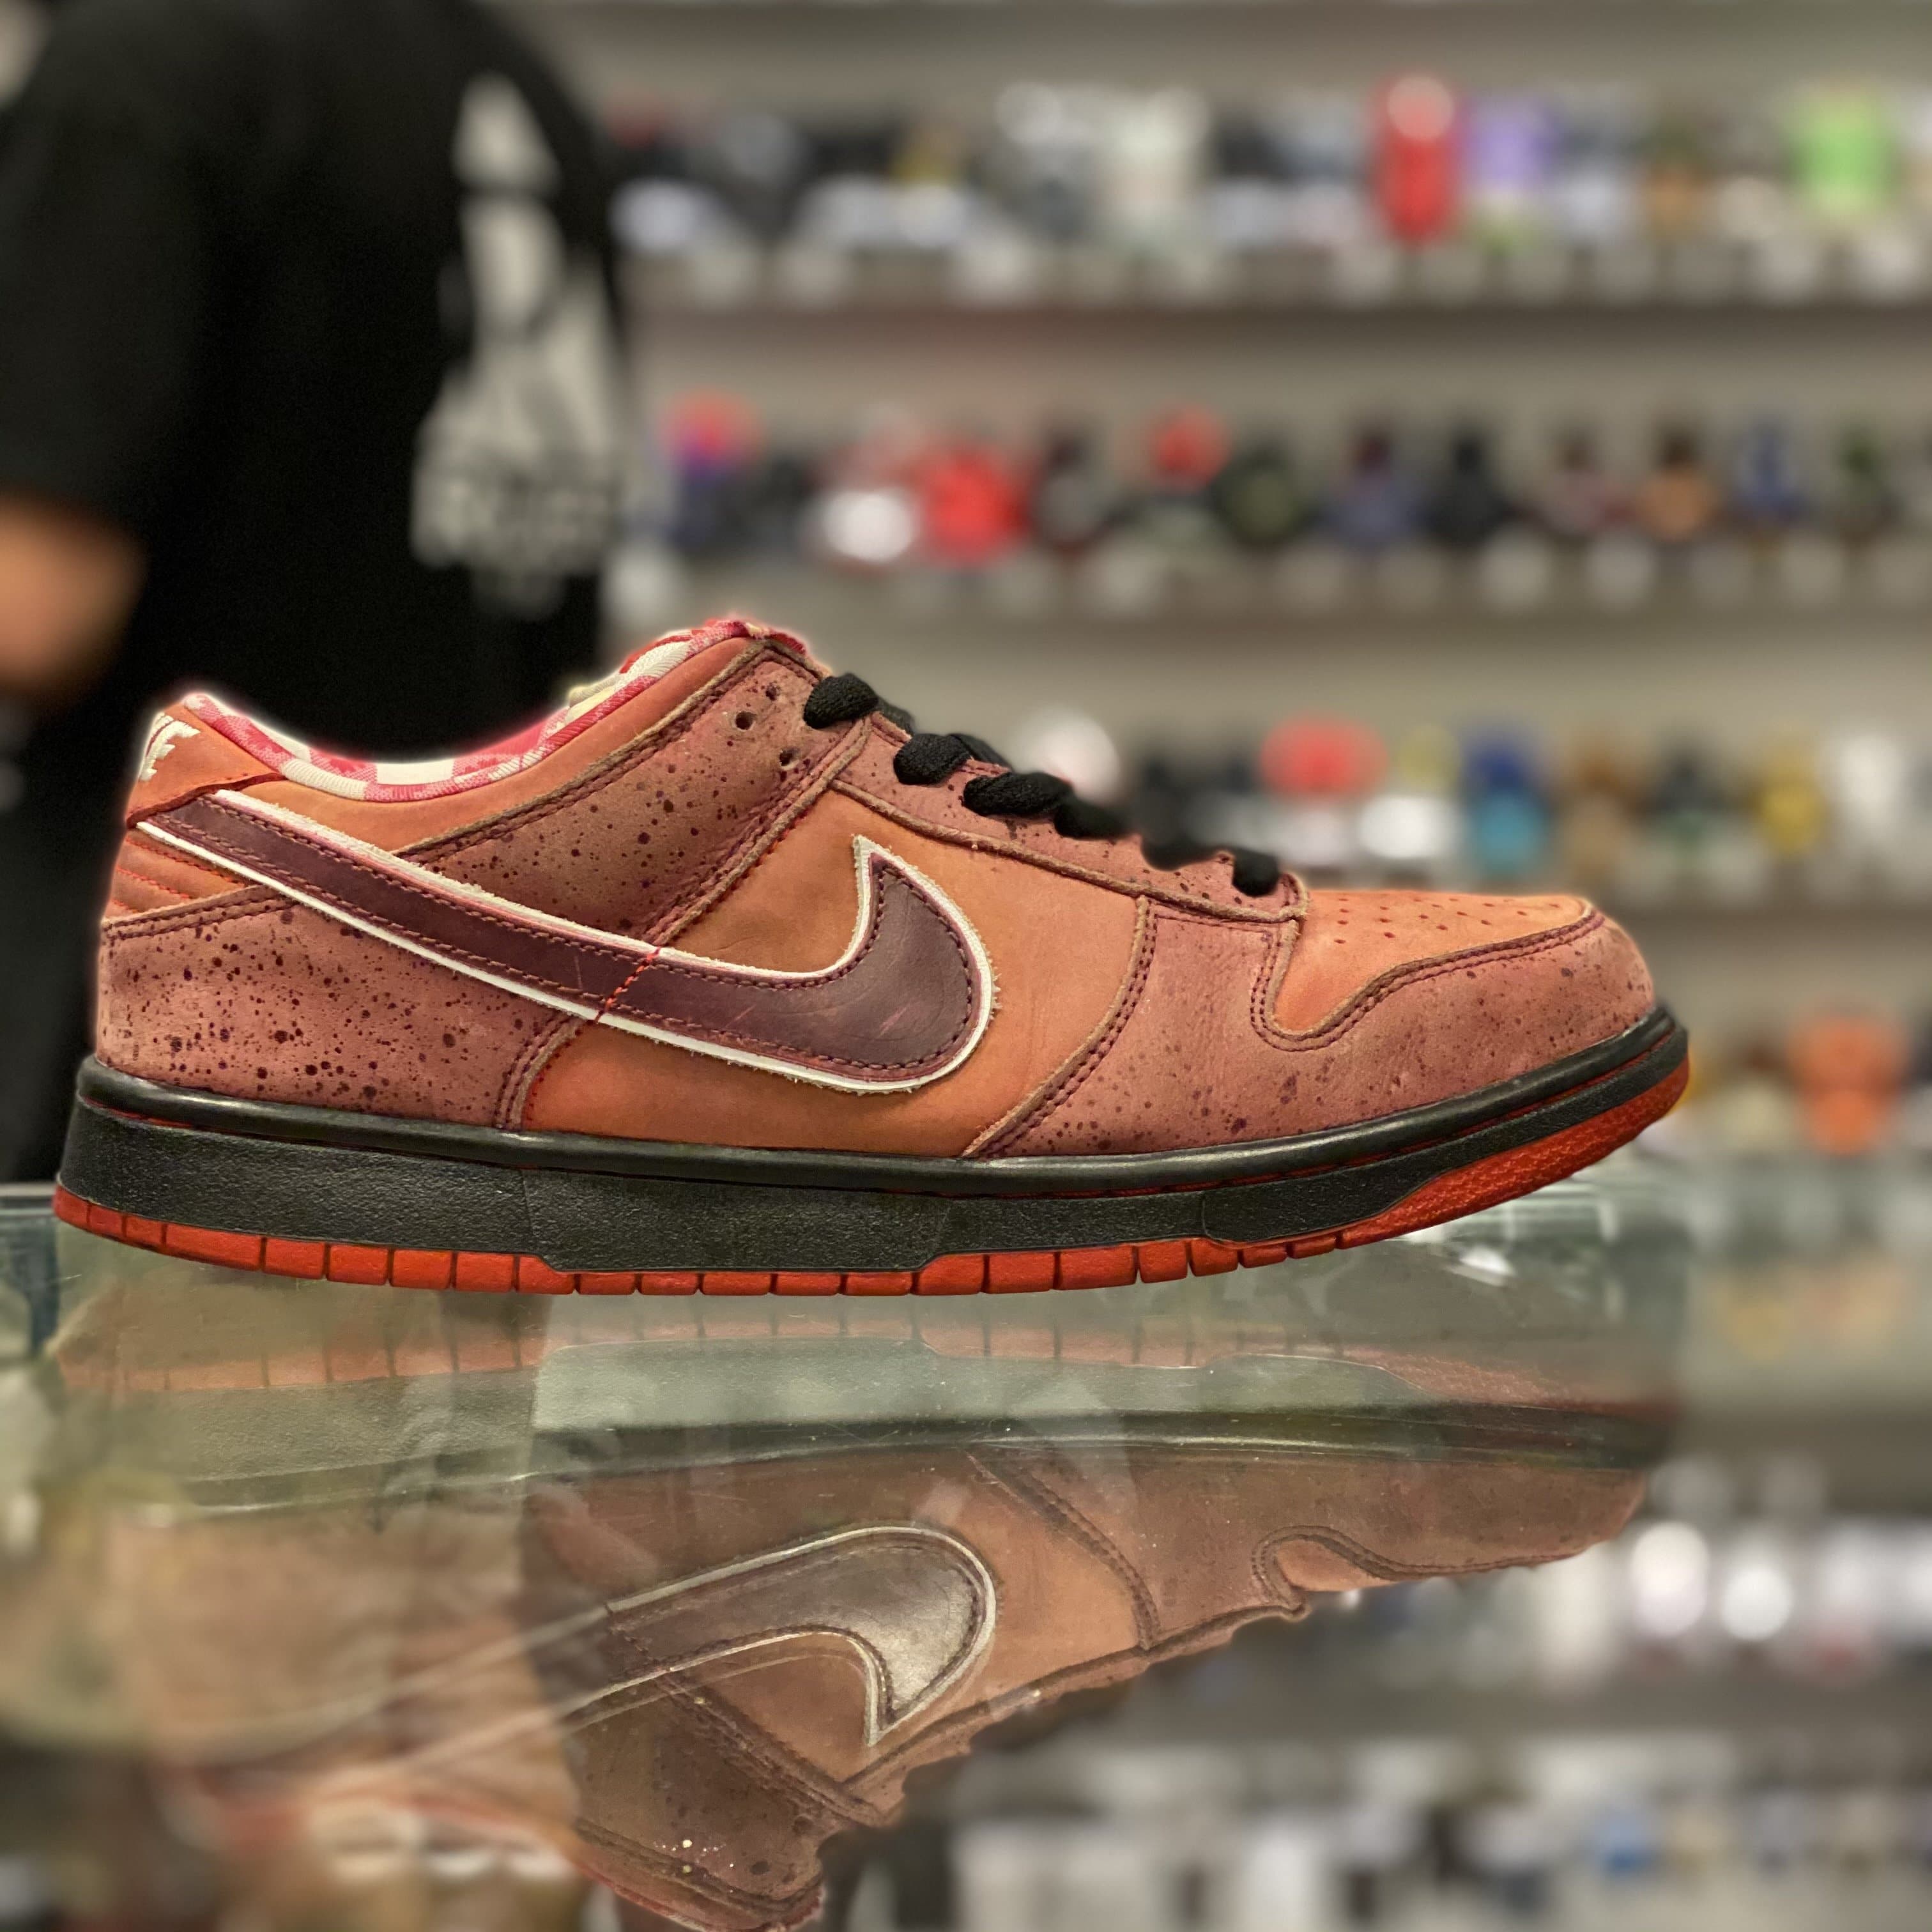 Nike SB Dunk Low “Red Lobster”